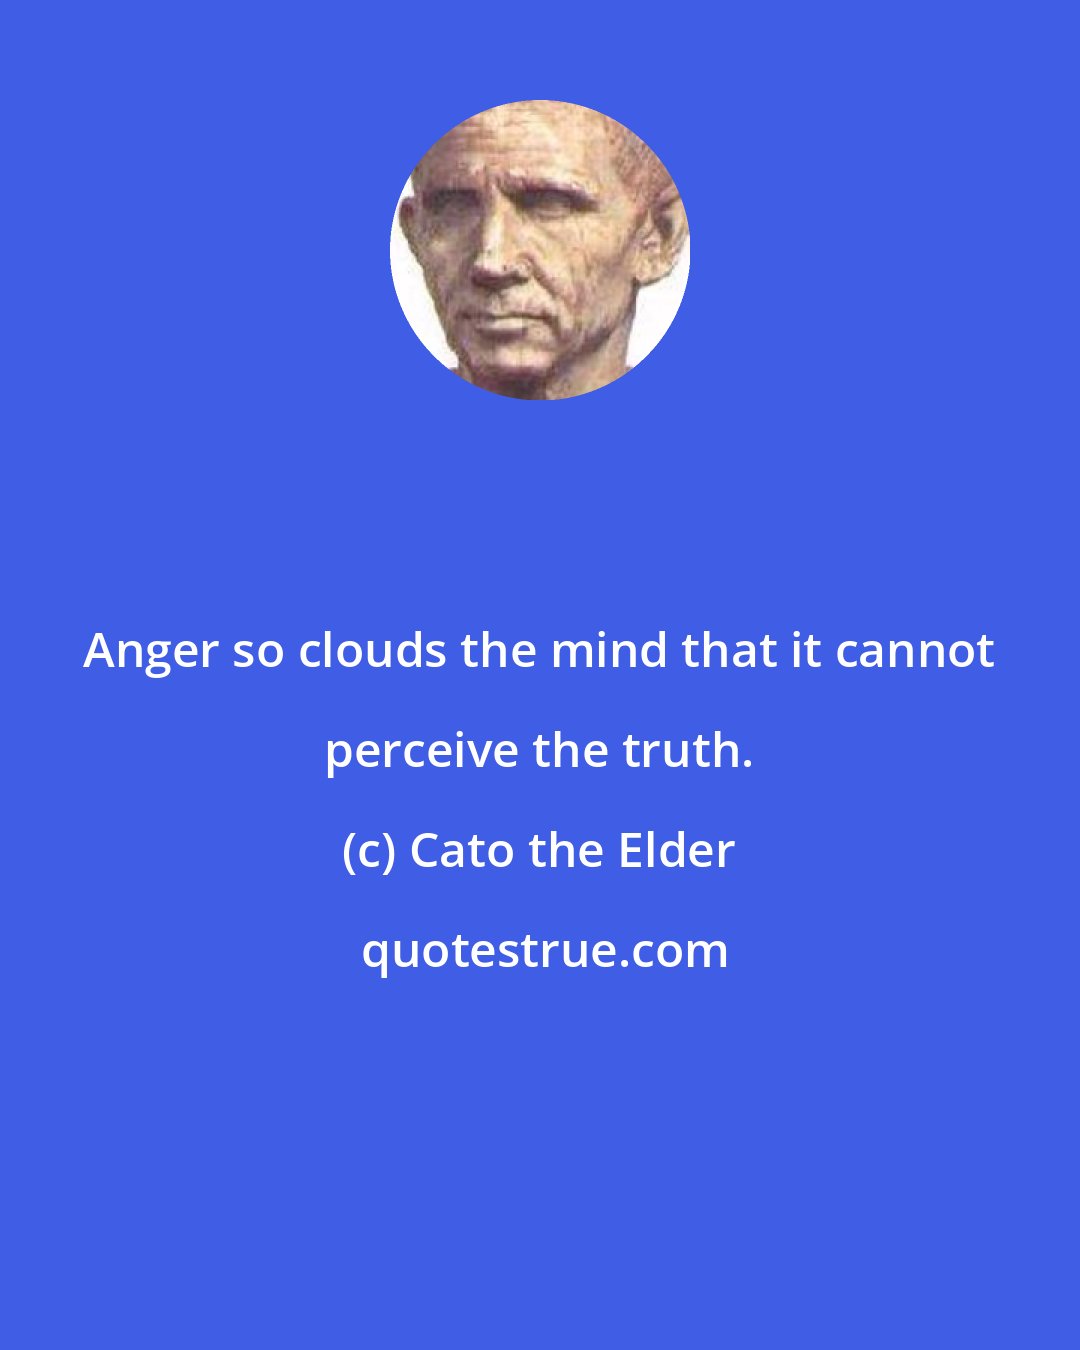 Cato the Elder: Anger so clouds the mind that it cannot perceive the truth.